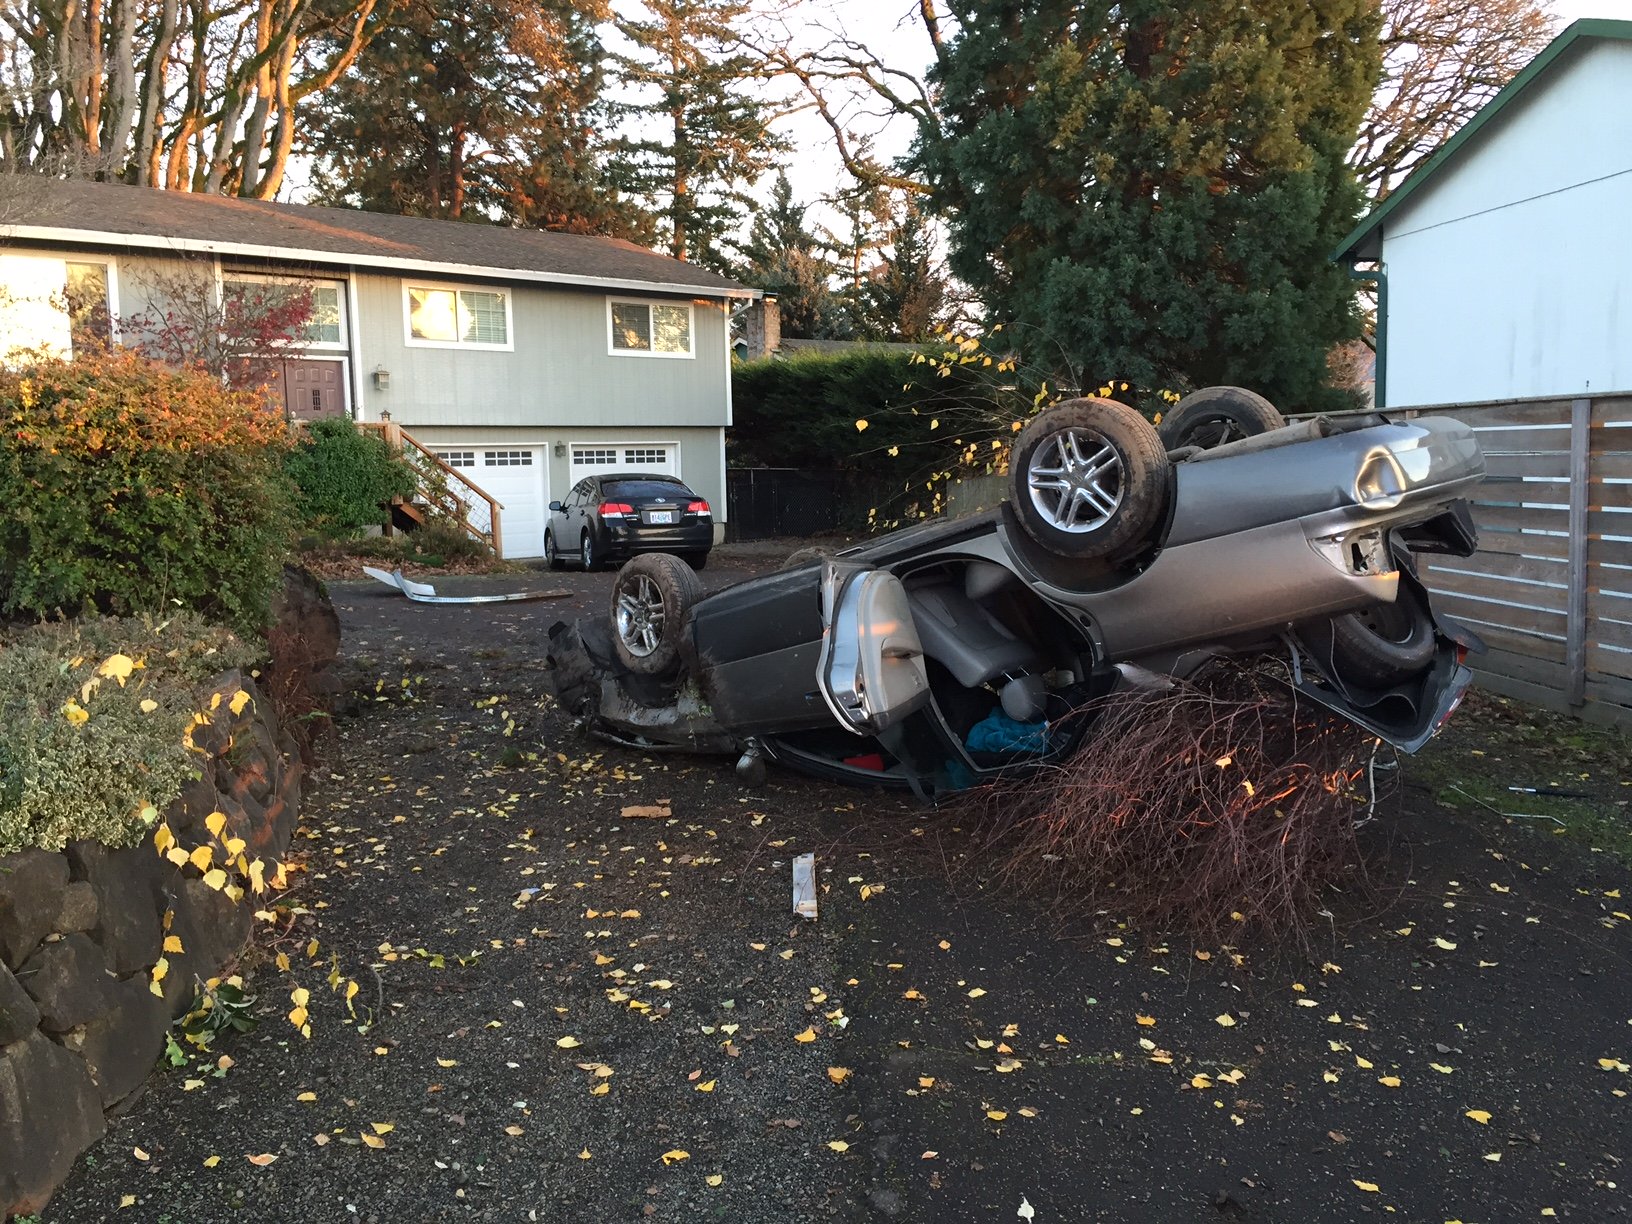 Two Vancouver women were arrested after deputies say they shoplifted from a Clackamas Town Center store before leading them on a pursuit that ended in a crash.